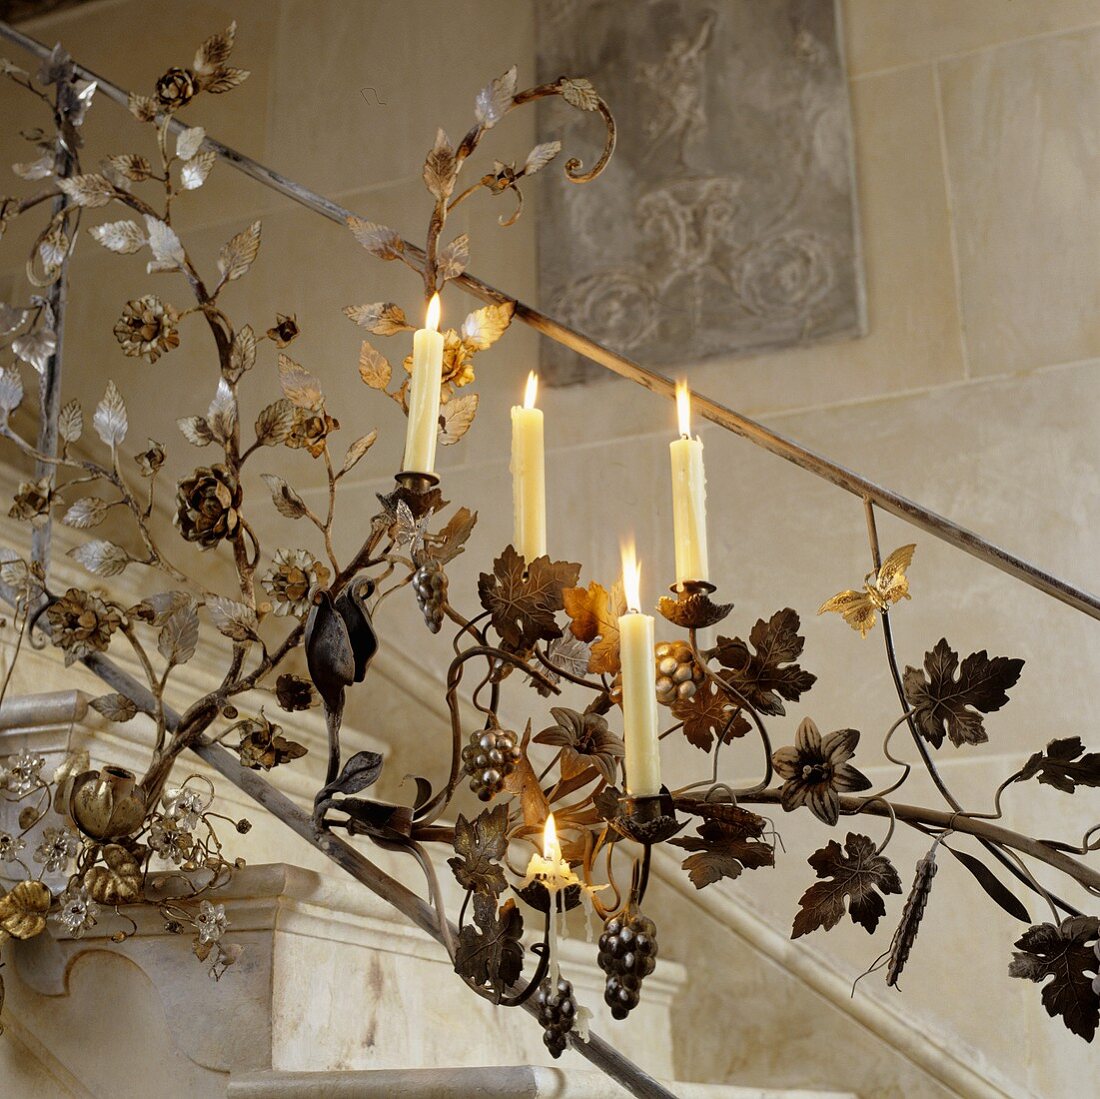 Burning candles in a metal banister featuring a floral design and candle holders